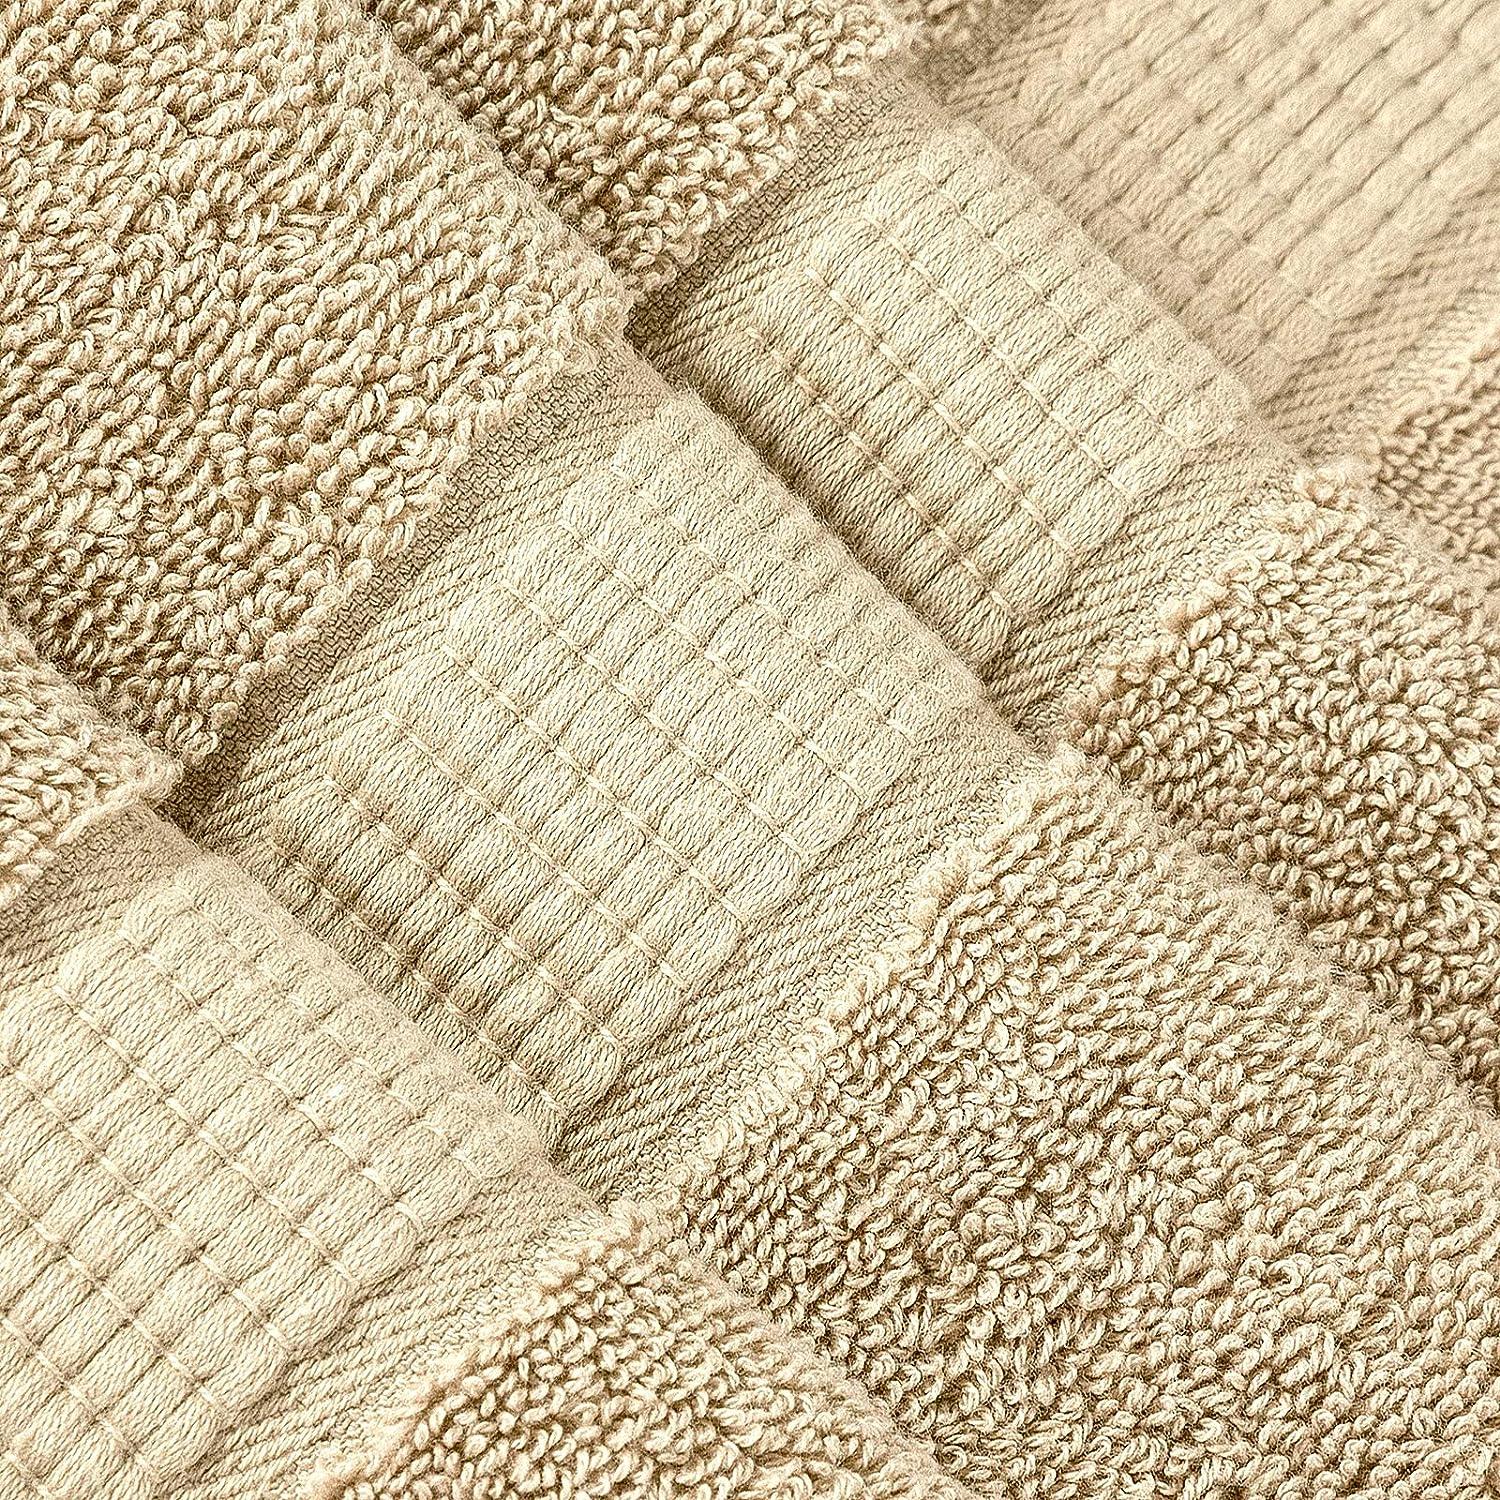 Oakias 2 Pack Luxury Bath Sheets Beige 35 x 70 Inches Highly Absorbent &  Soft 600 GSM Extra Large Bath Towels Beige 2